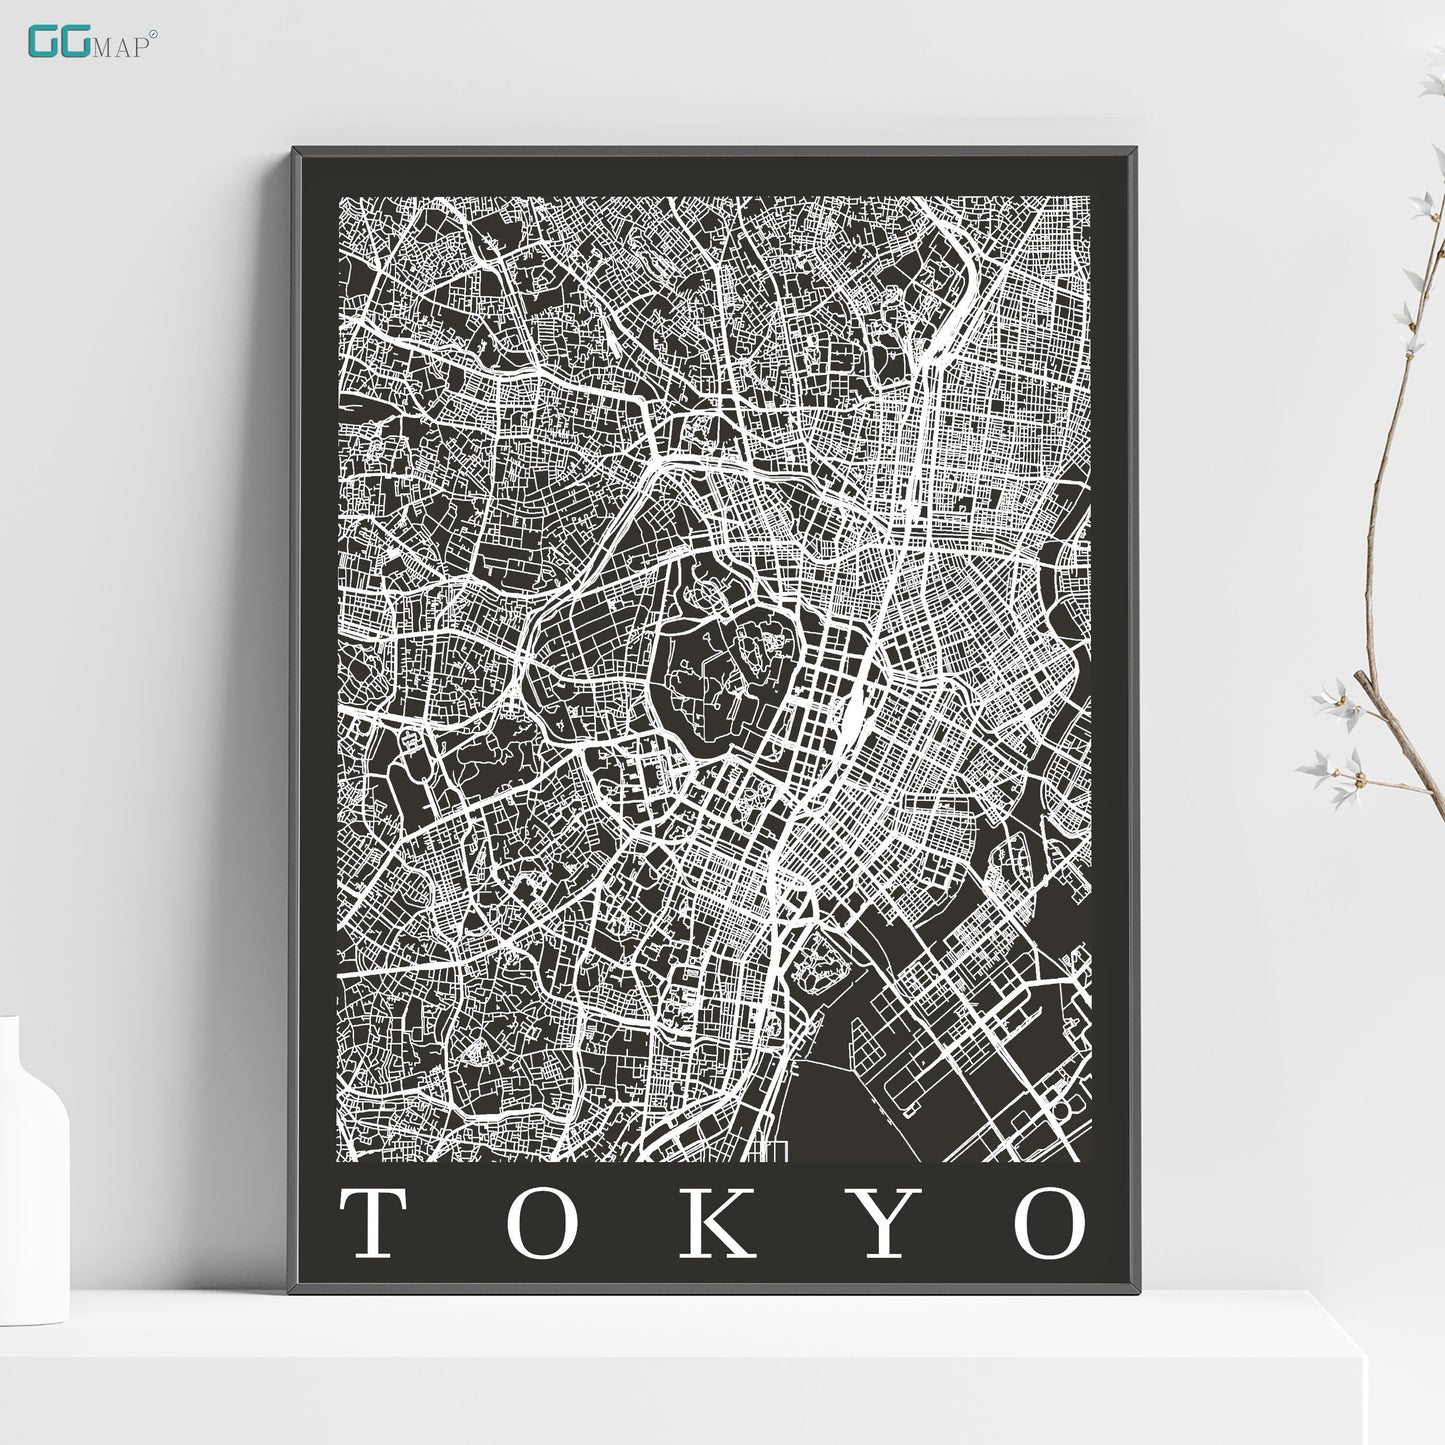 a black and white map of tokyo, japan